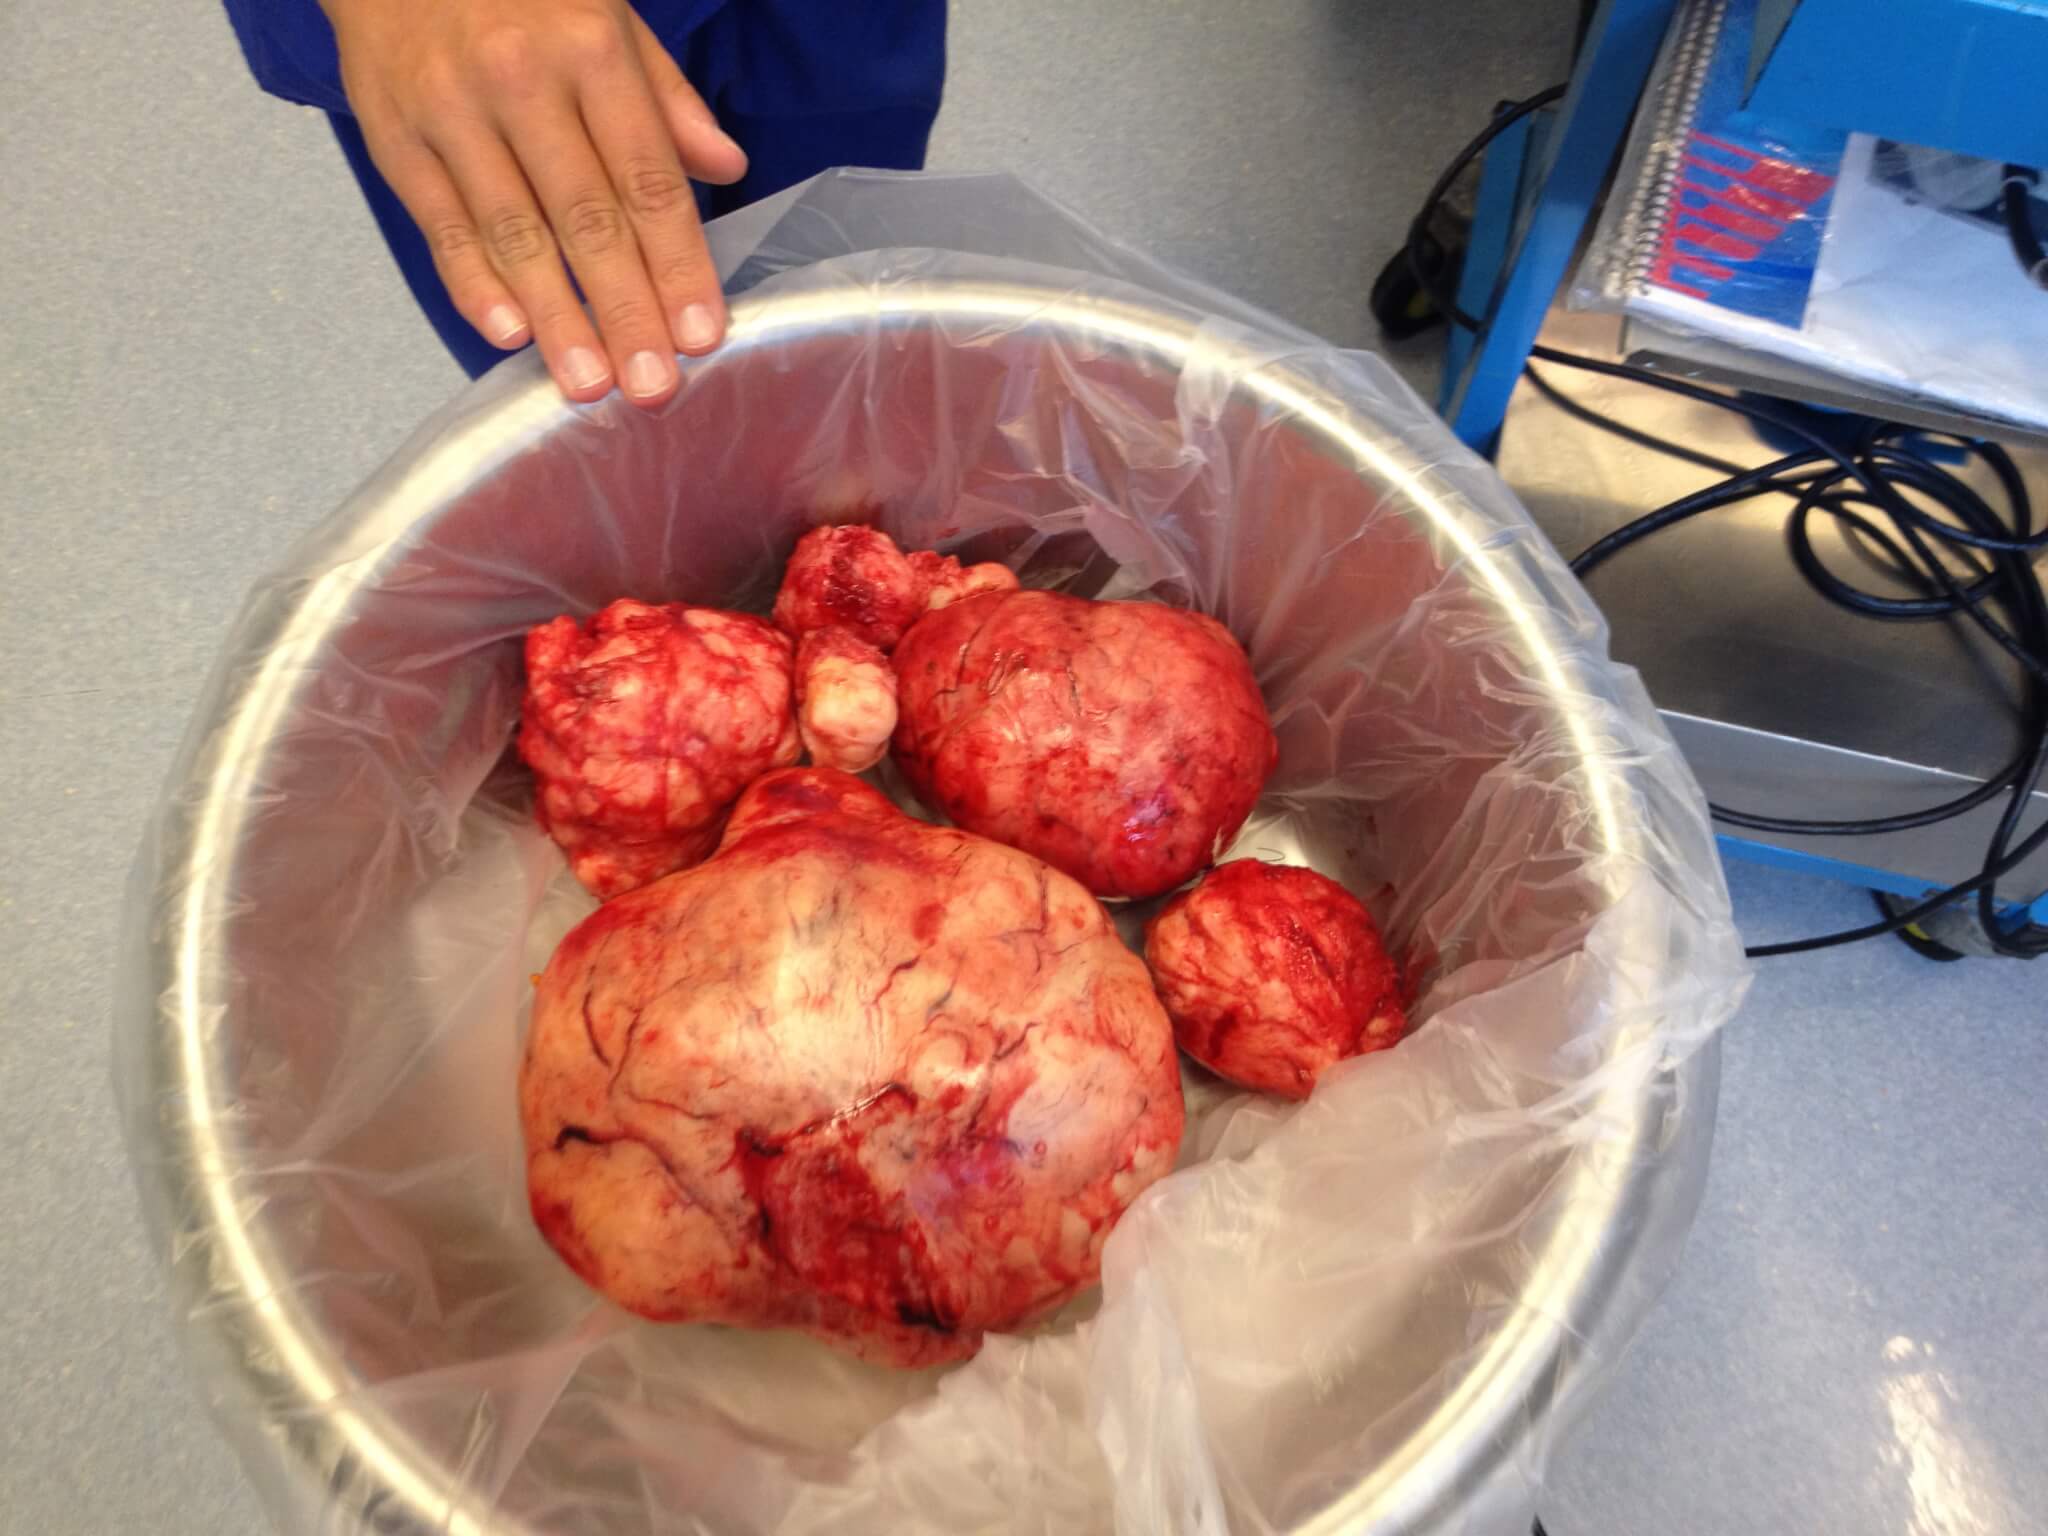 Fibroids after removal